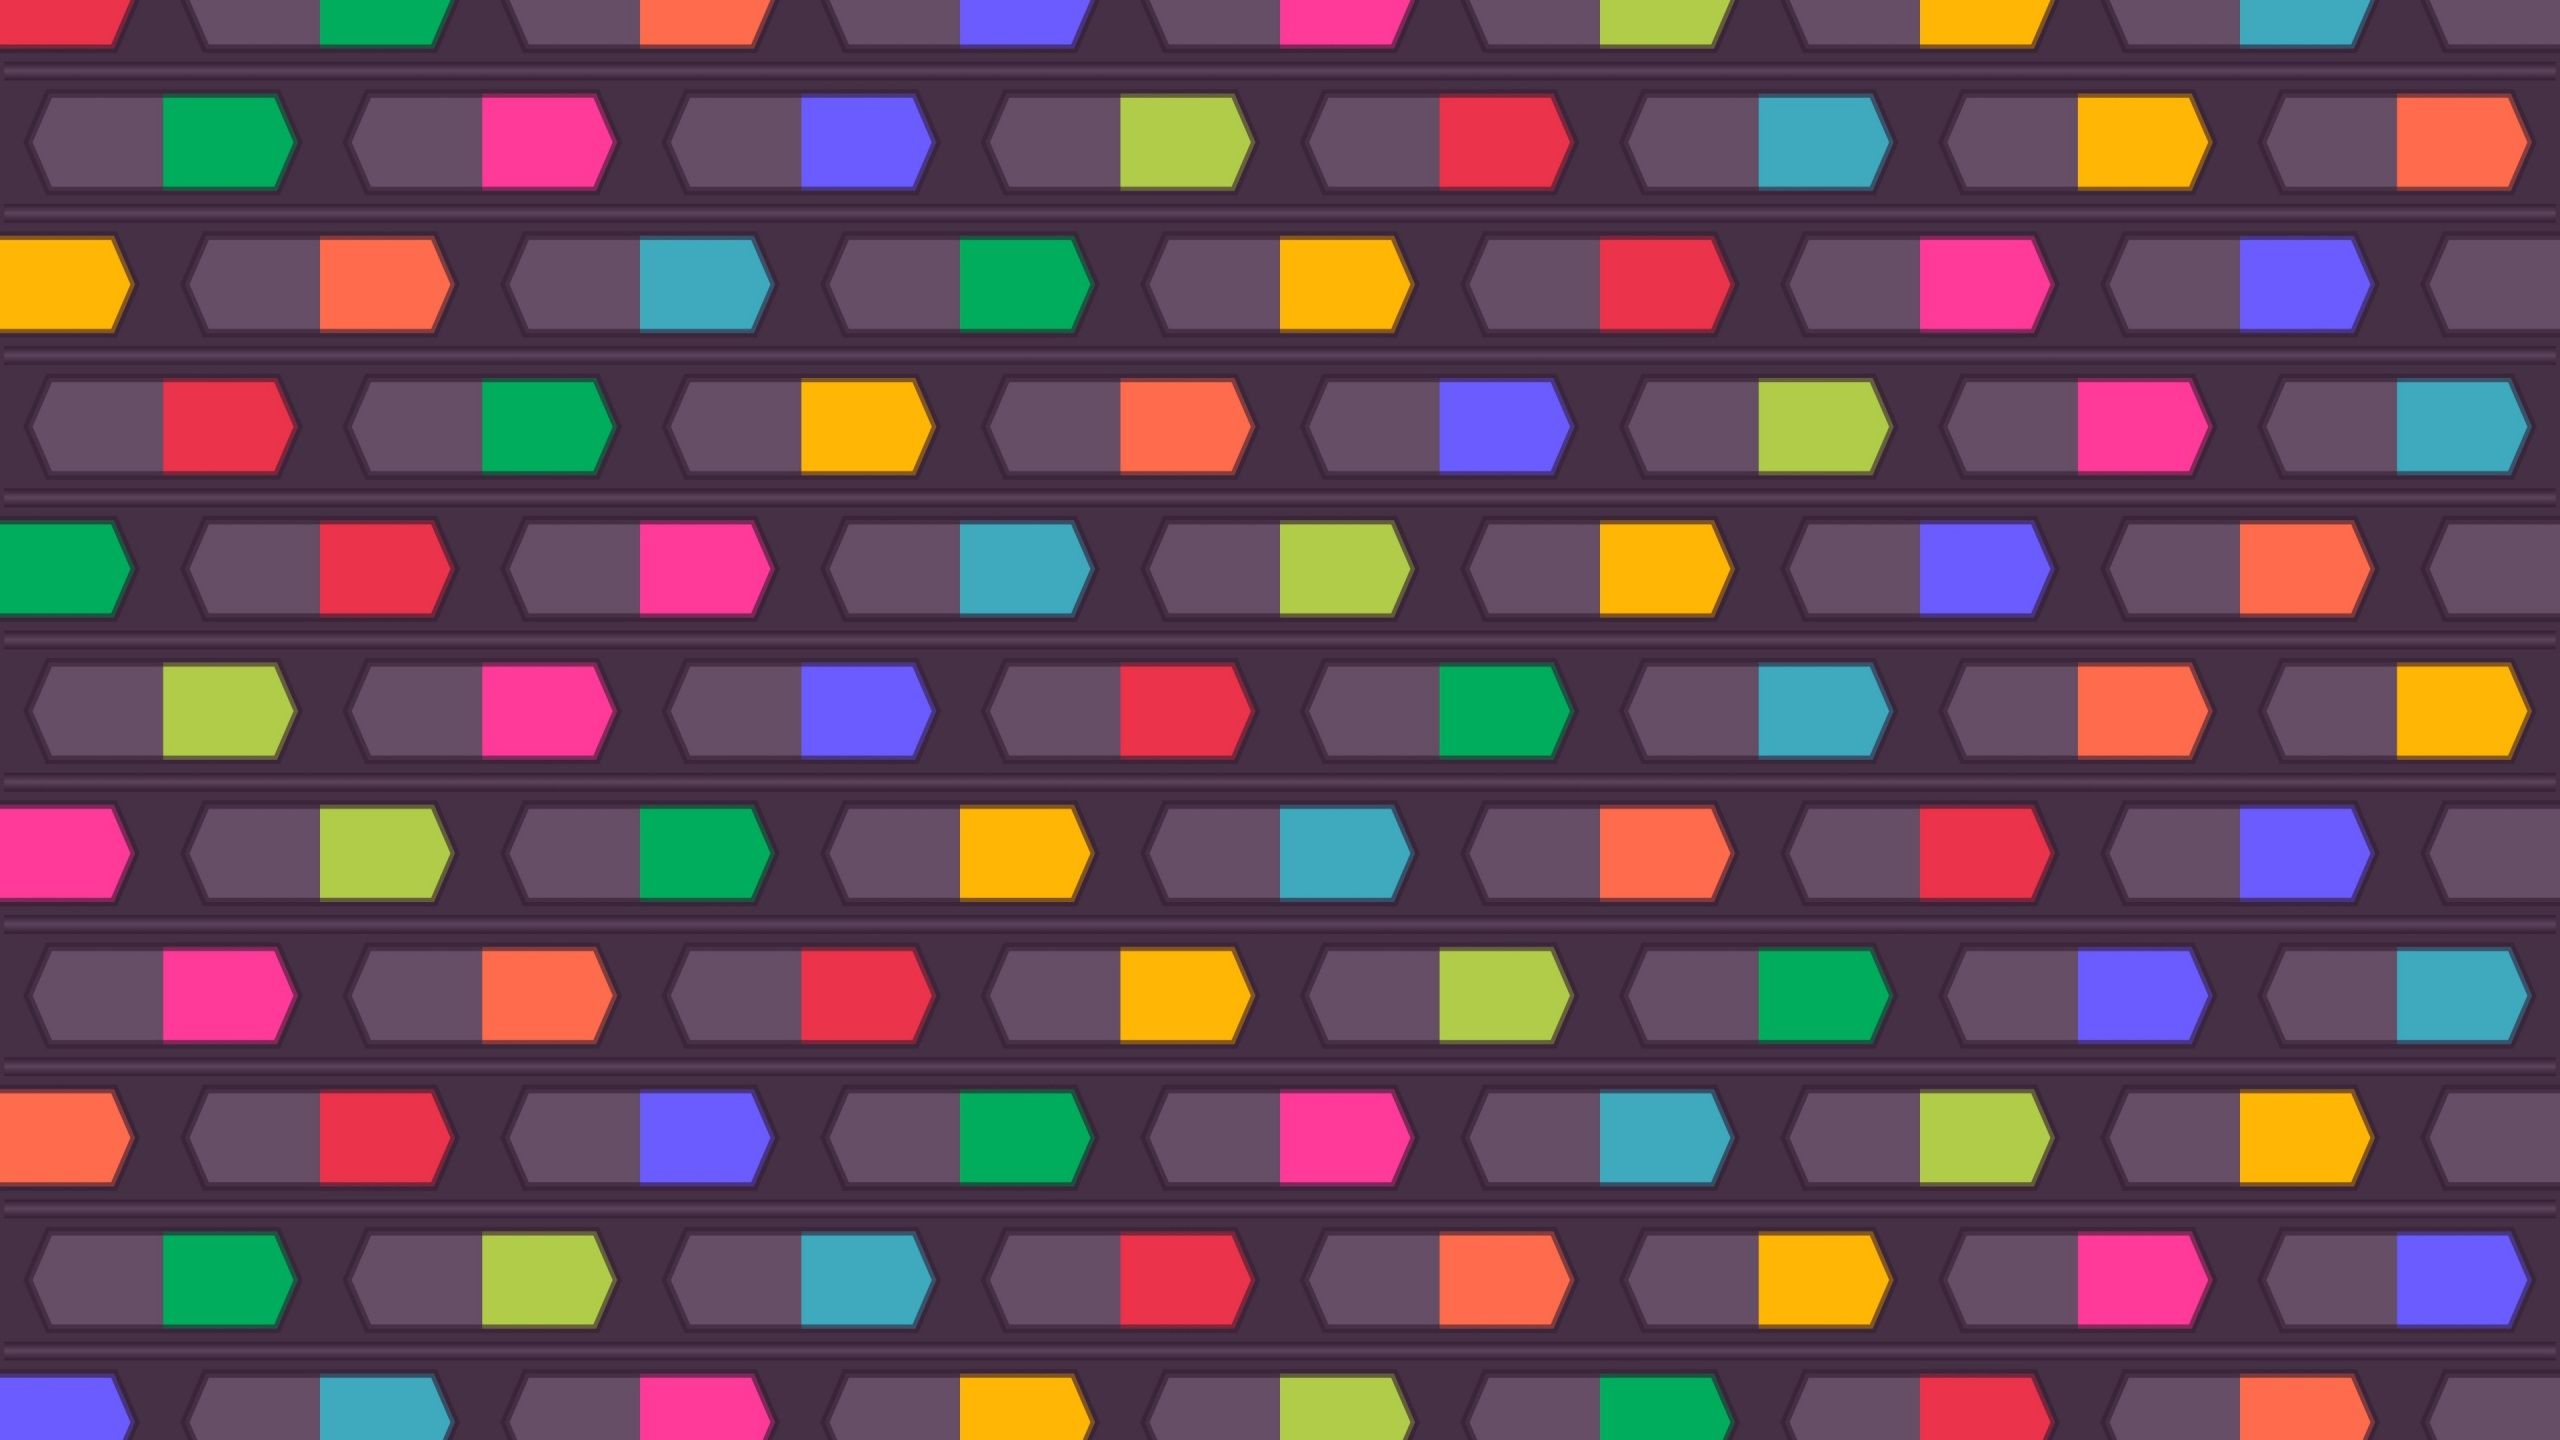 Wallpaper 4k Colorful Texture Shapes abstract wallpaper, artist wallpaper, colorful wallpaper, texture wallpaper